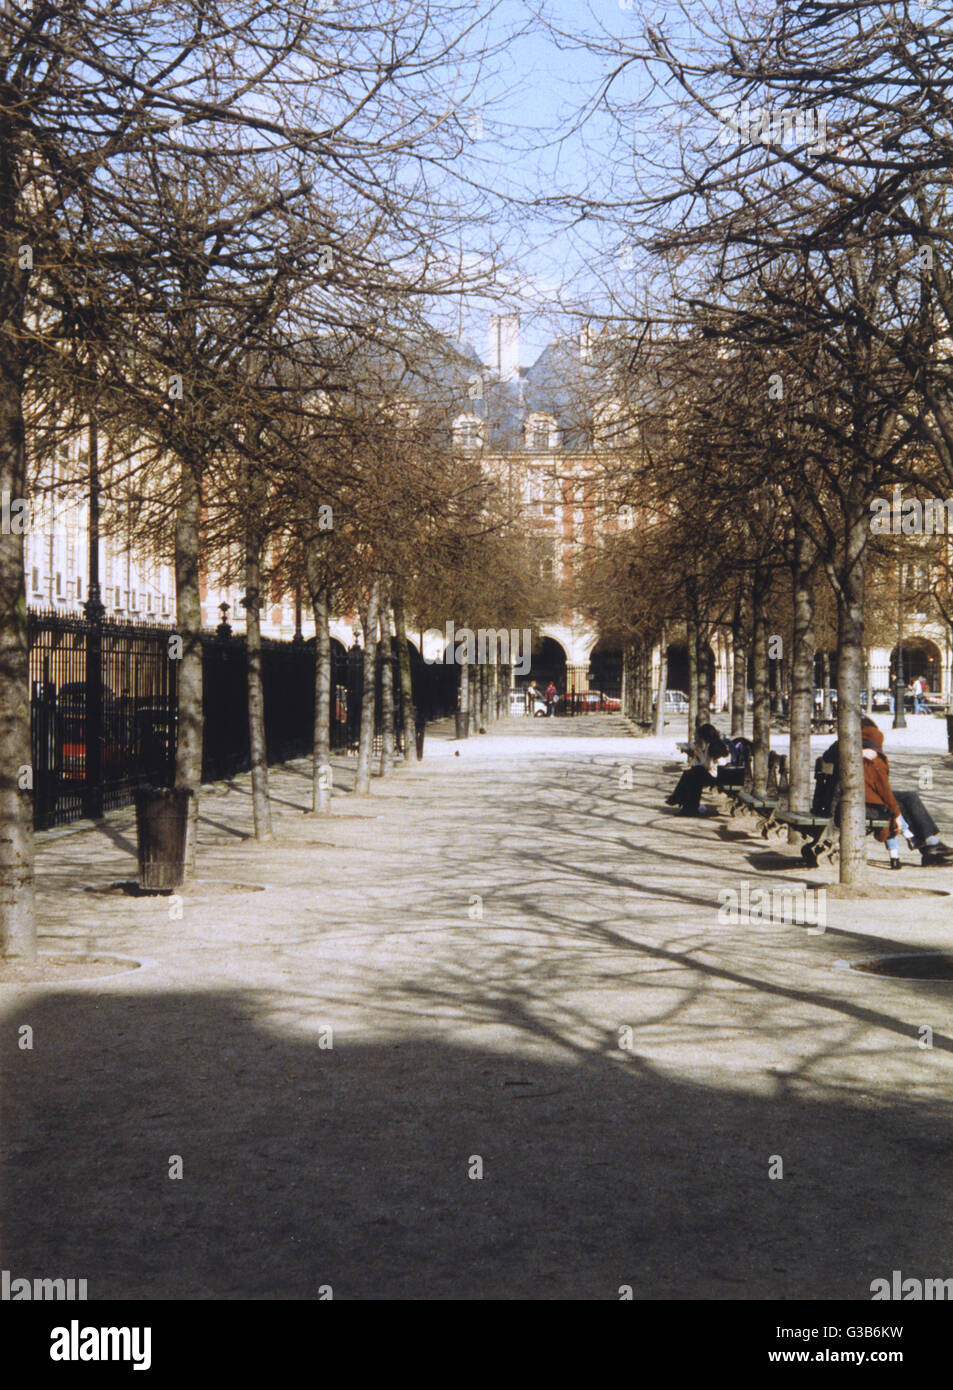 Place des Vosges on a sunny autumn day        Date: 1993 Stock Photo